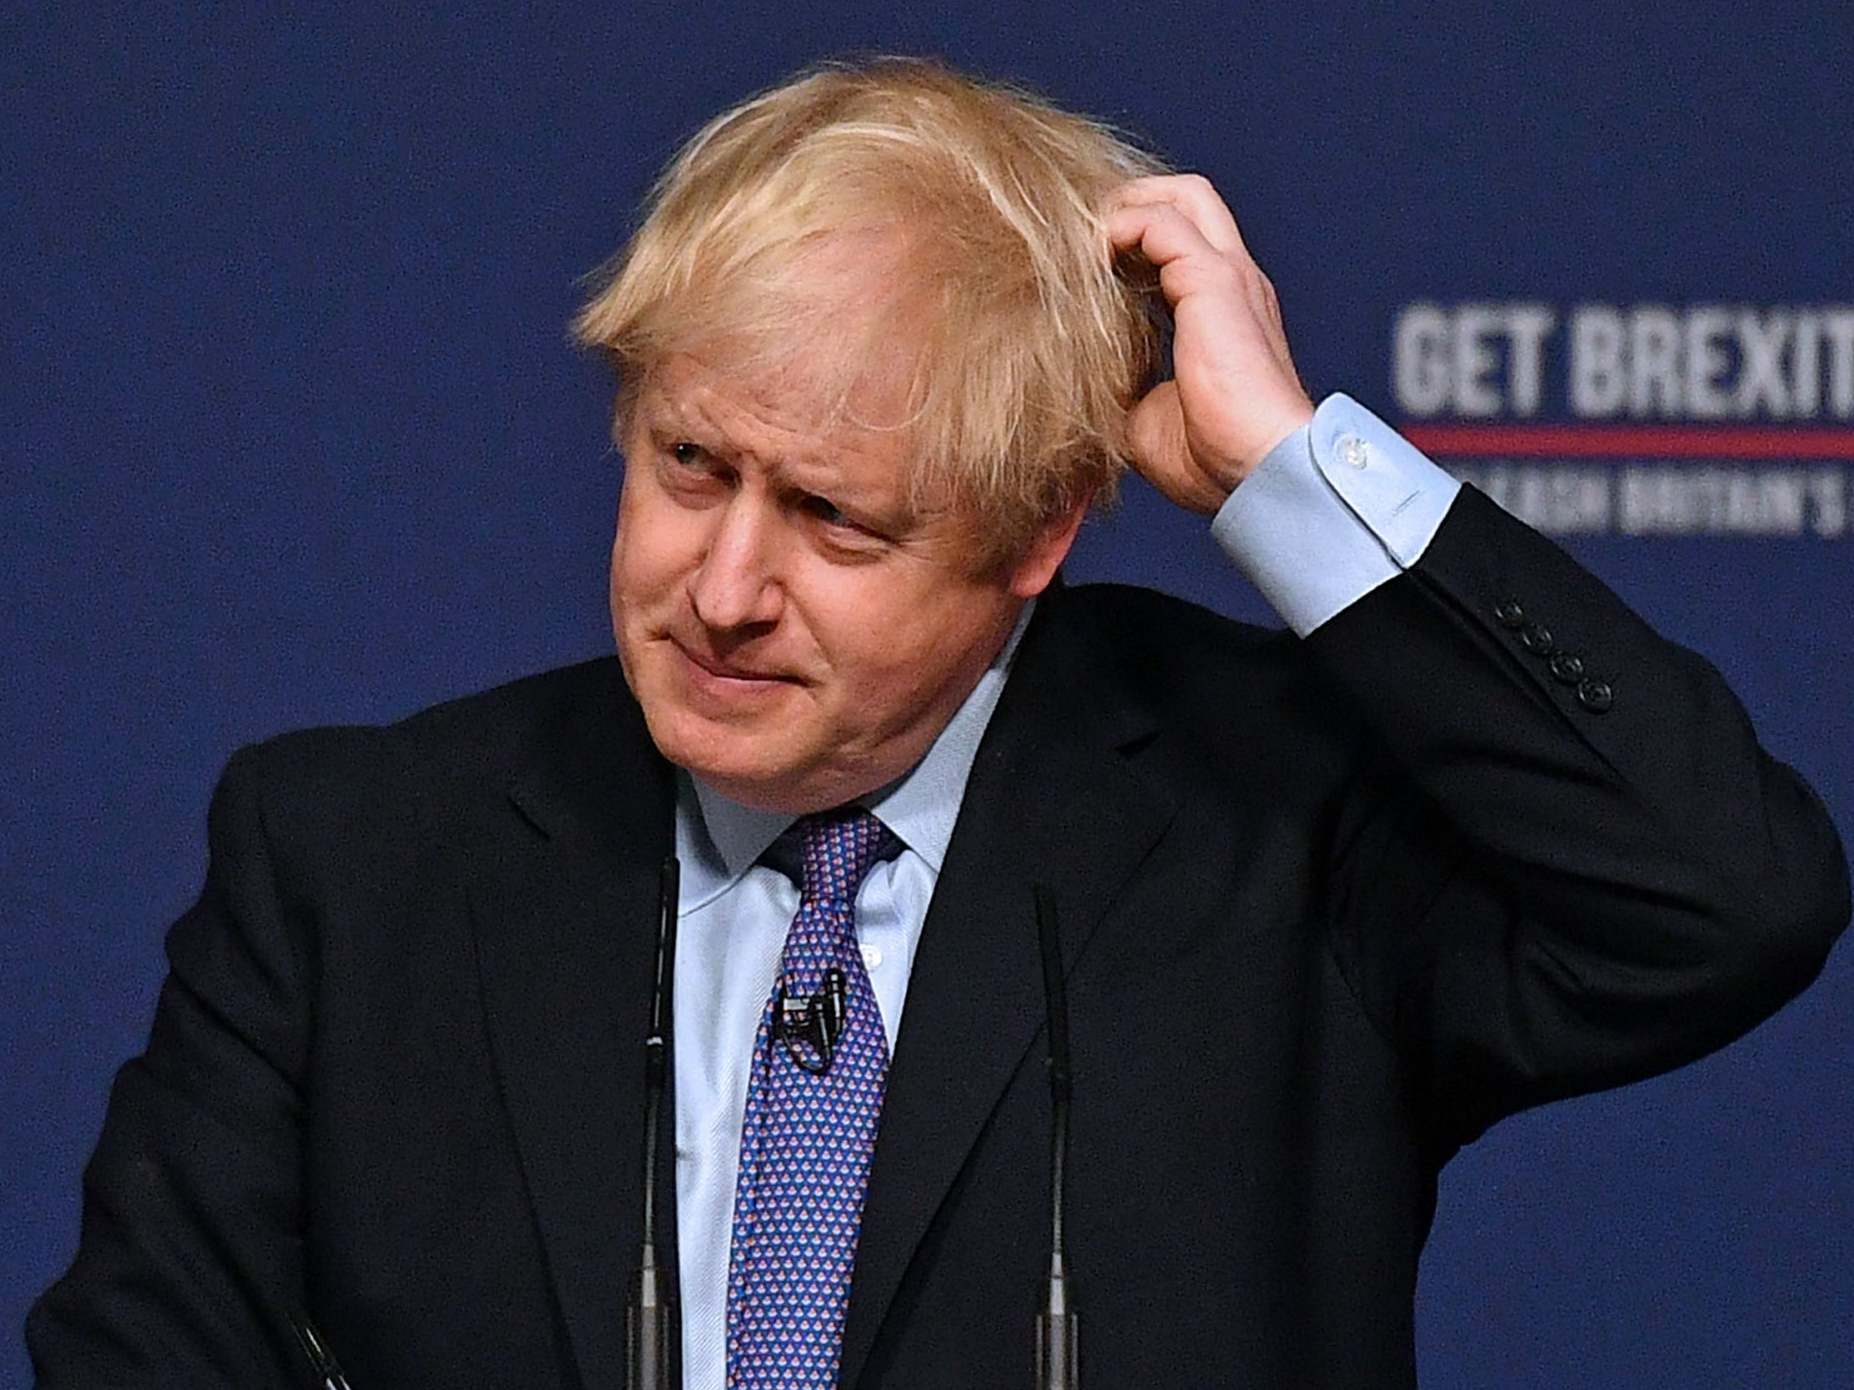 Boris Johnson has refused to take part in the climate debate